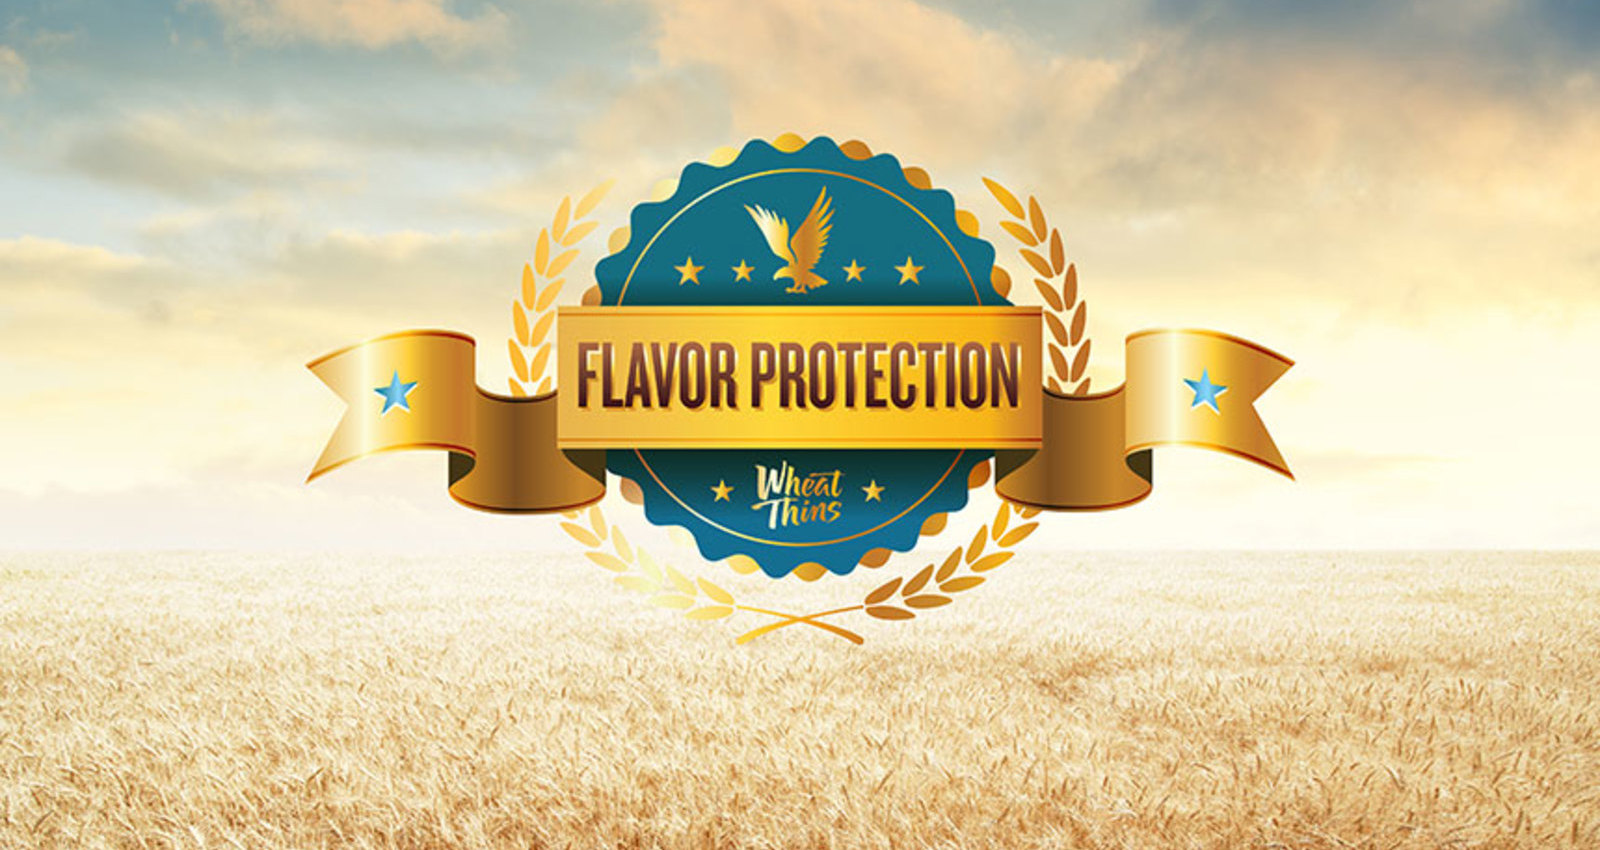 Wheat Thins Flavor Protection Program